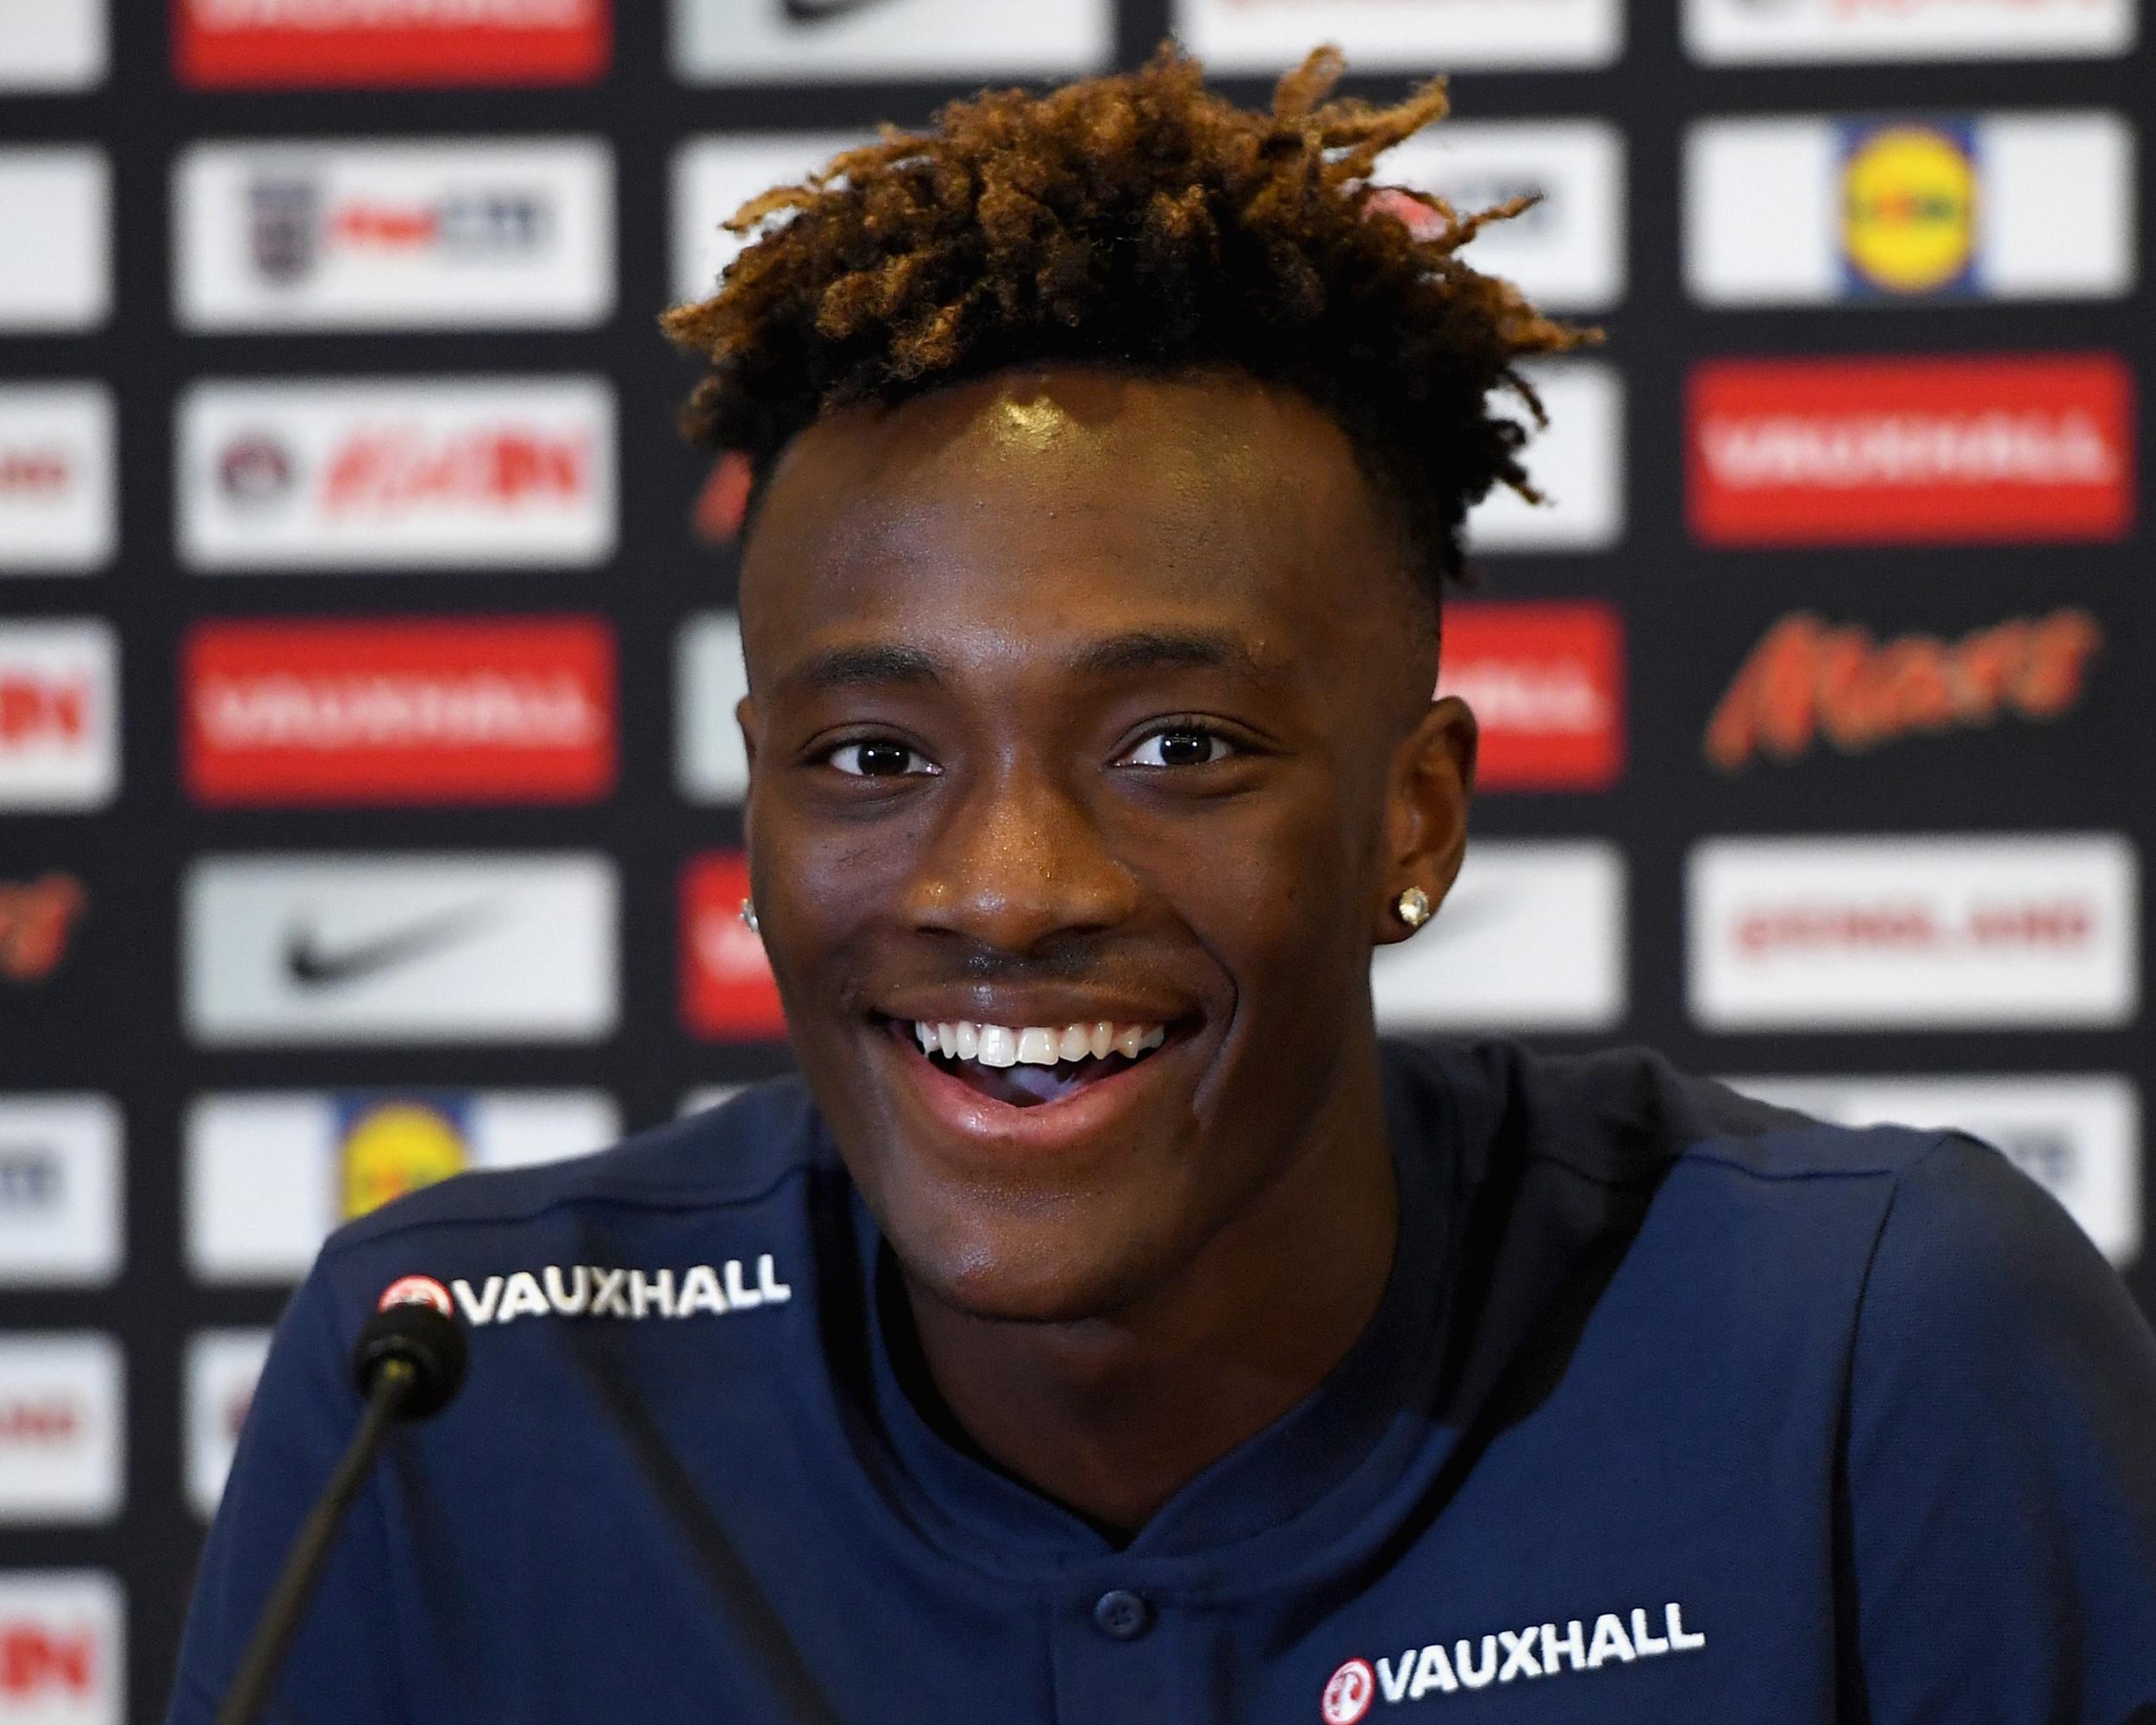 Abraham is hoping to make his England debut against either Germany or Brazil